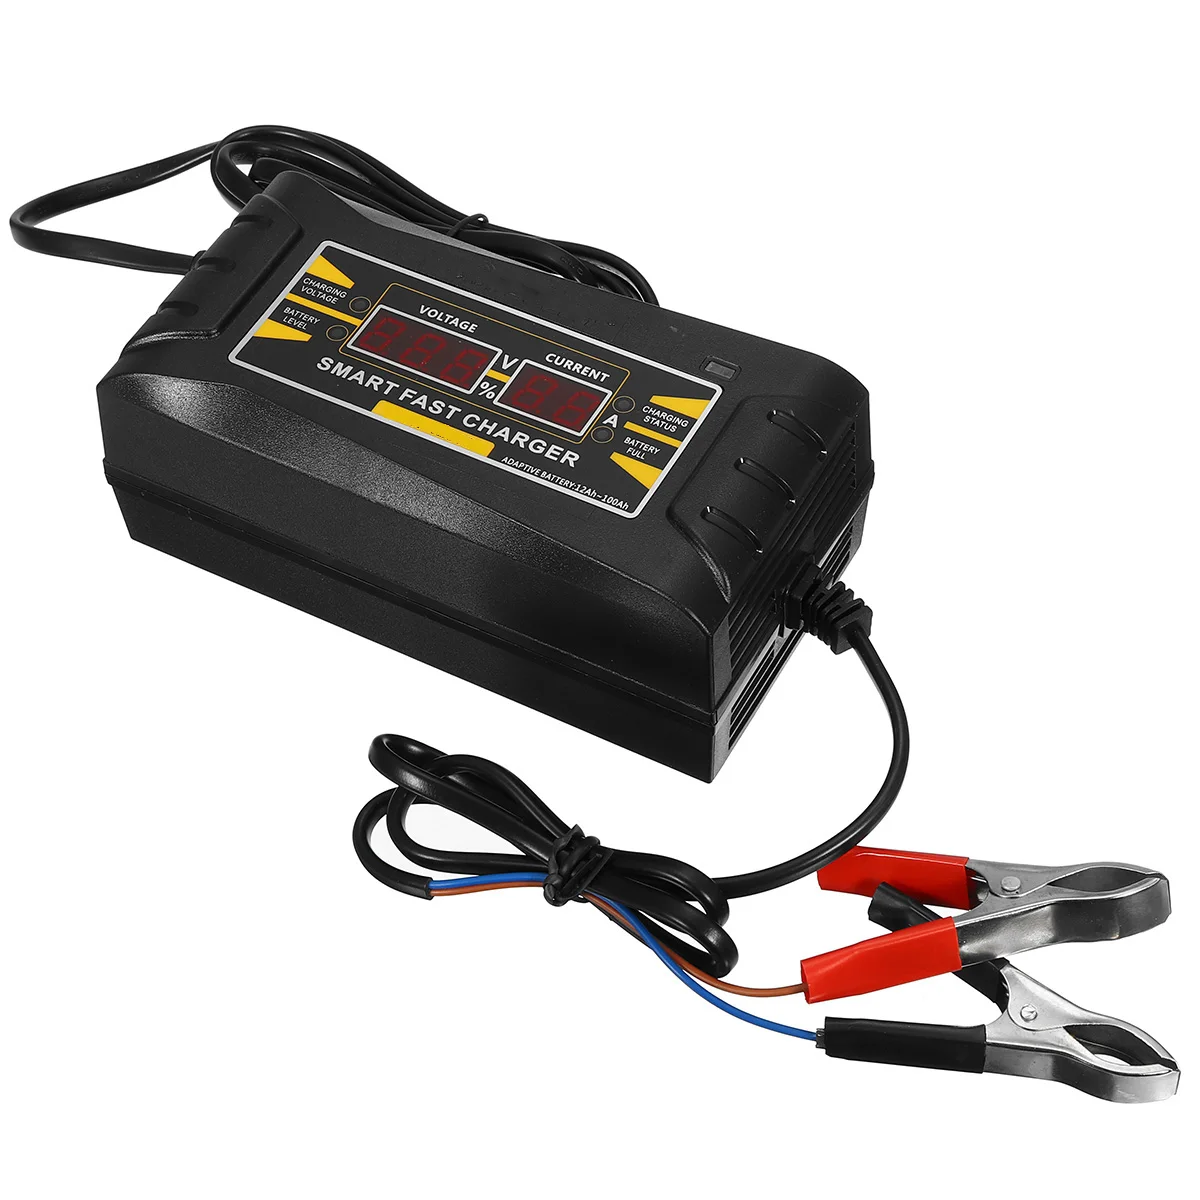 full automatic car battery charger 110v220v to 12v 6a smart fast power charging car motorcycle wet dry lead acid lcd display free global shipping